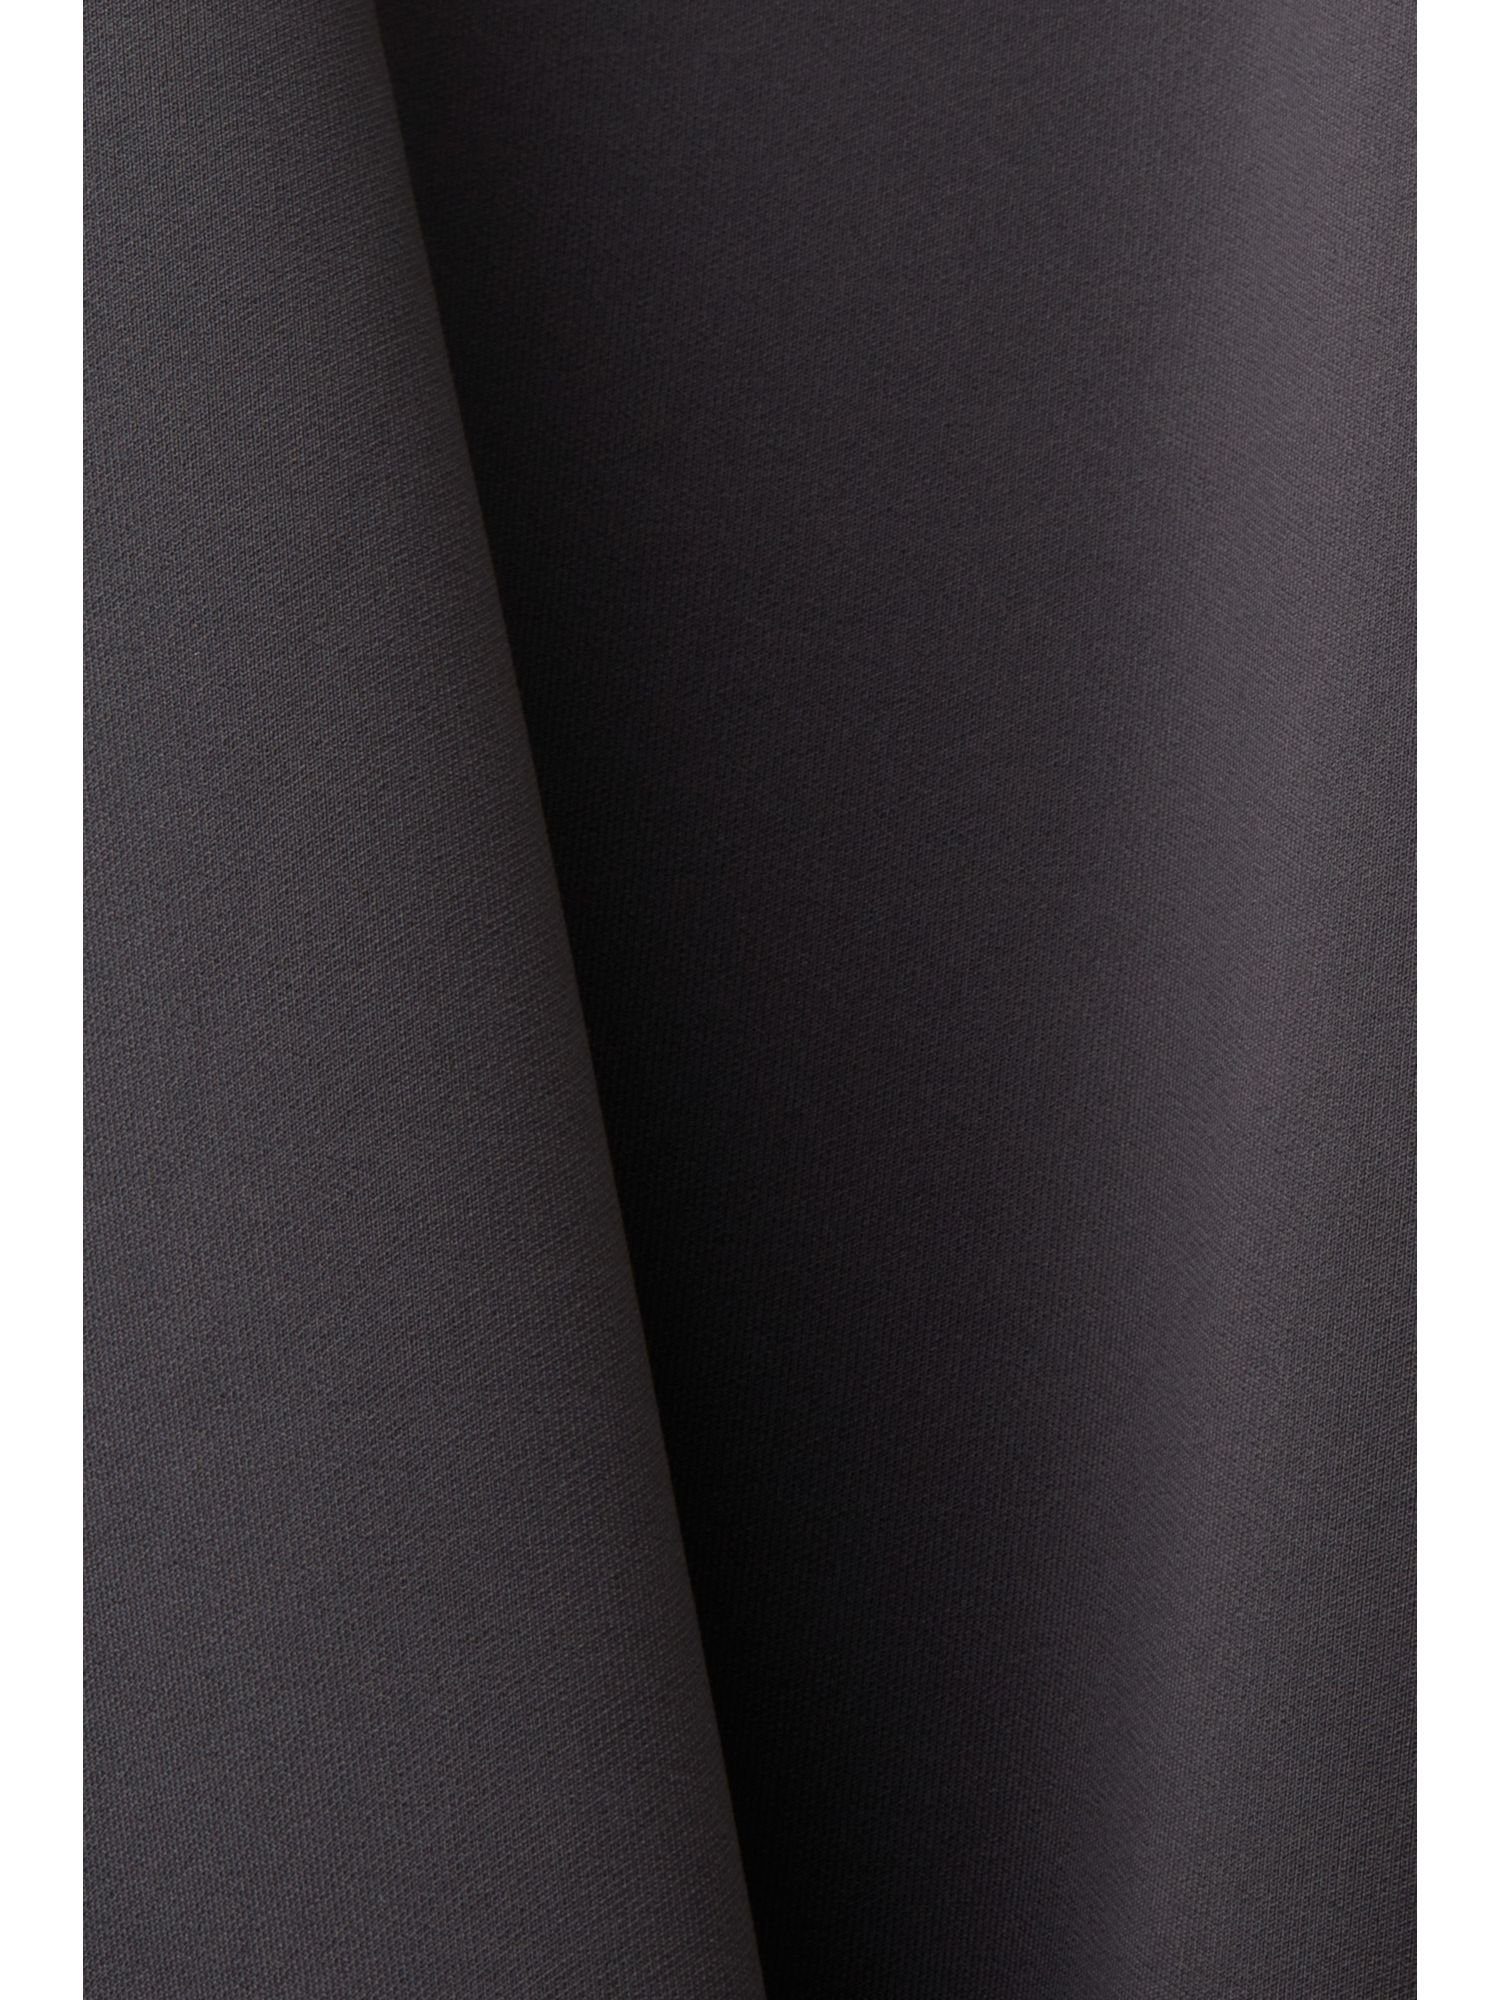 ANTHRACITE Sporthose Active-Hose Recycled: esprit sports